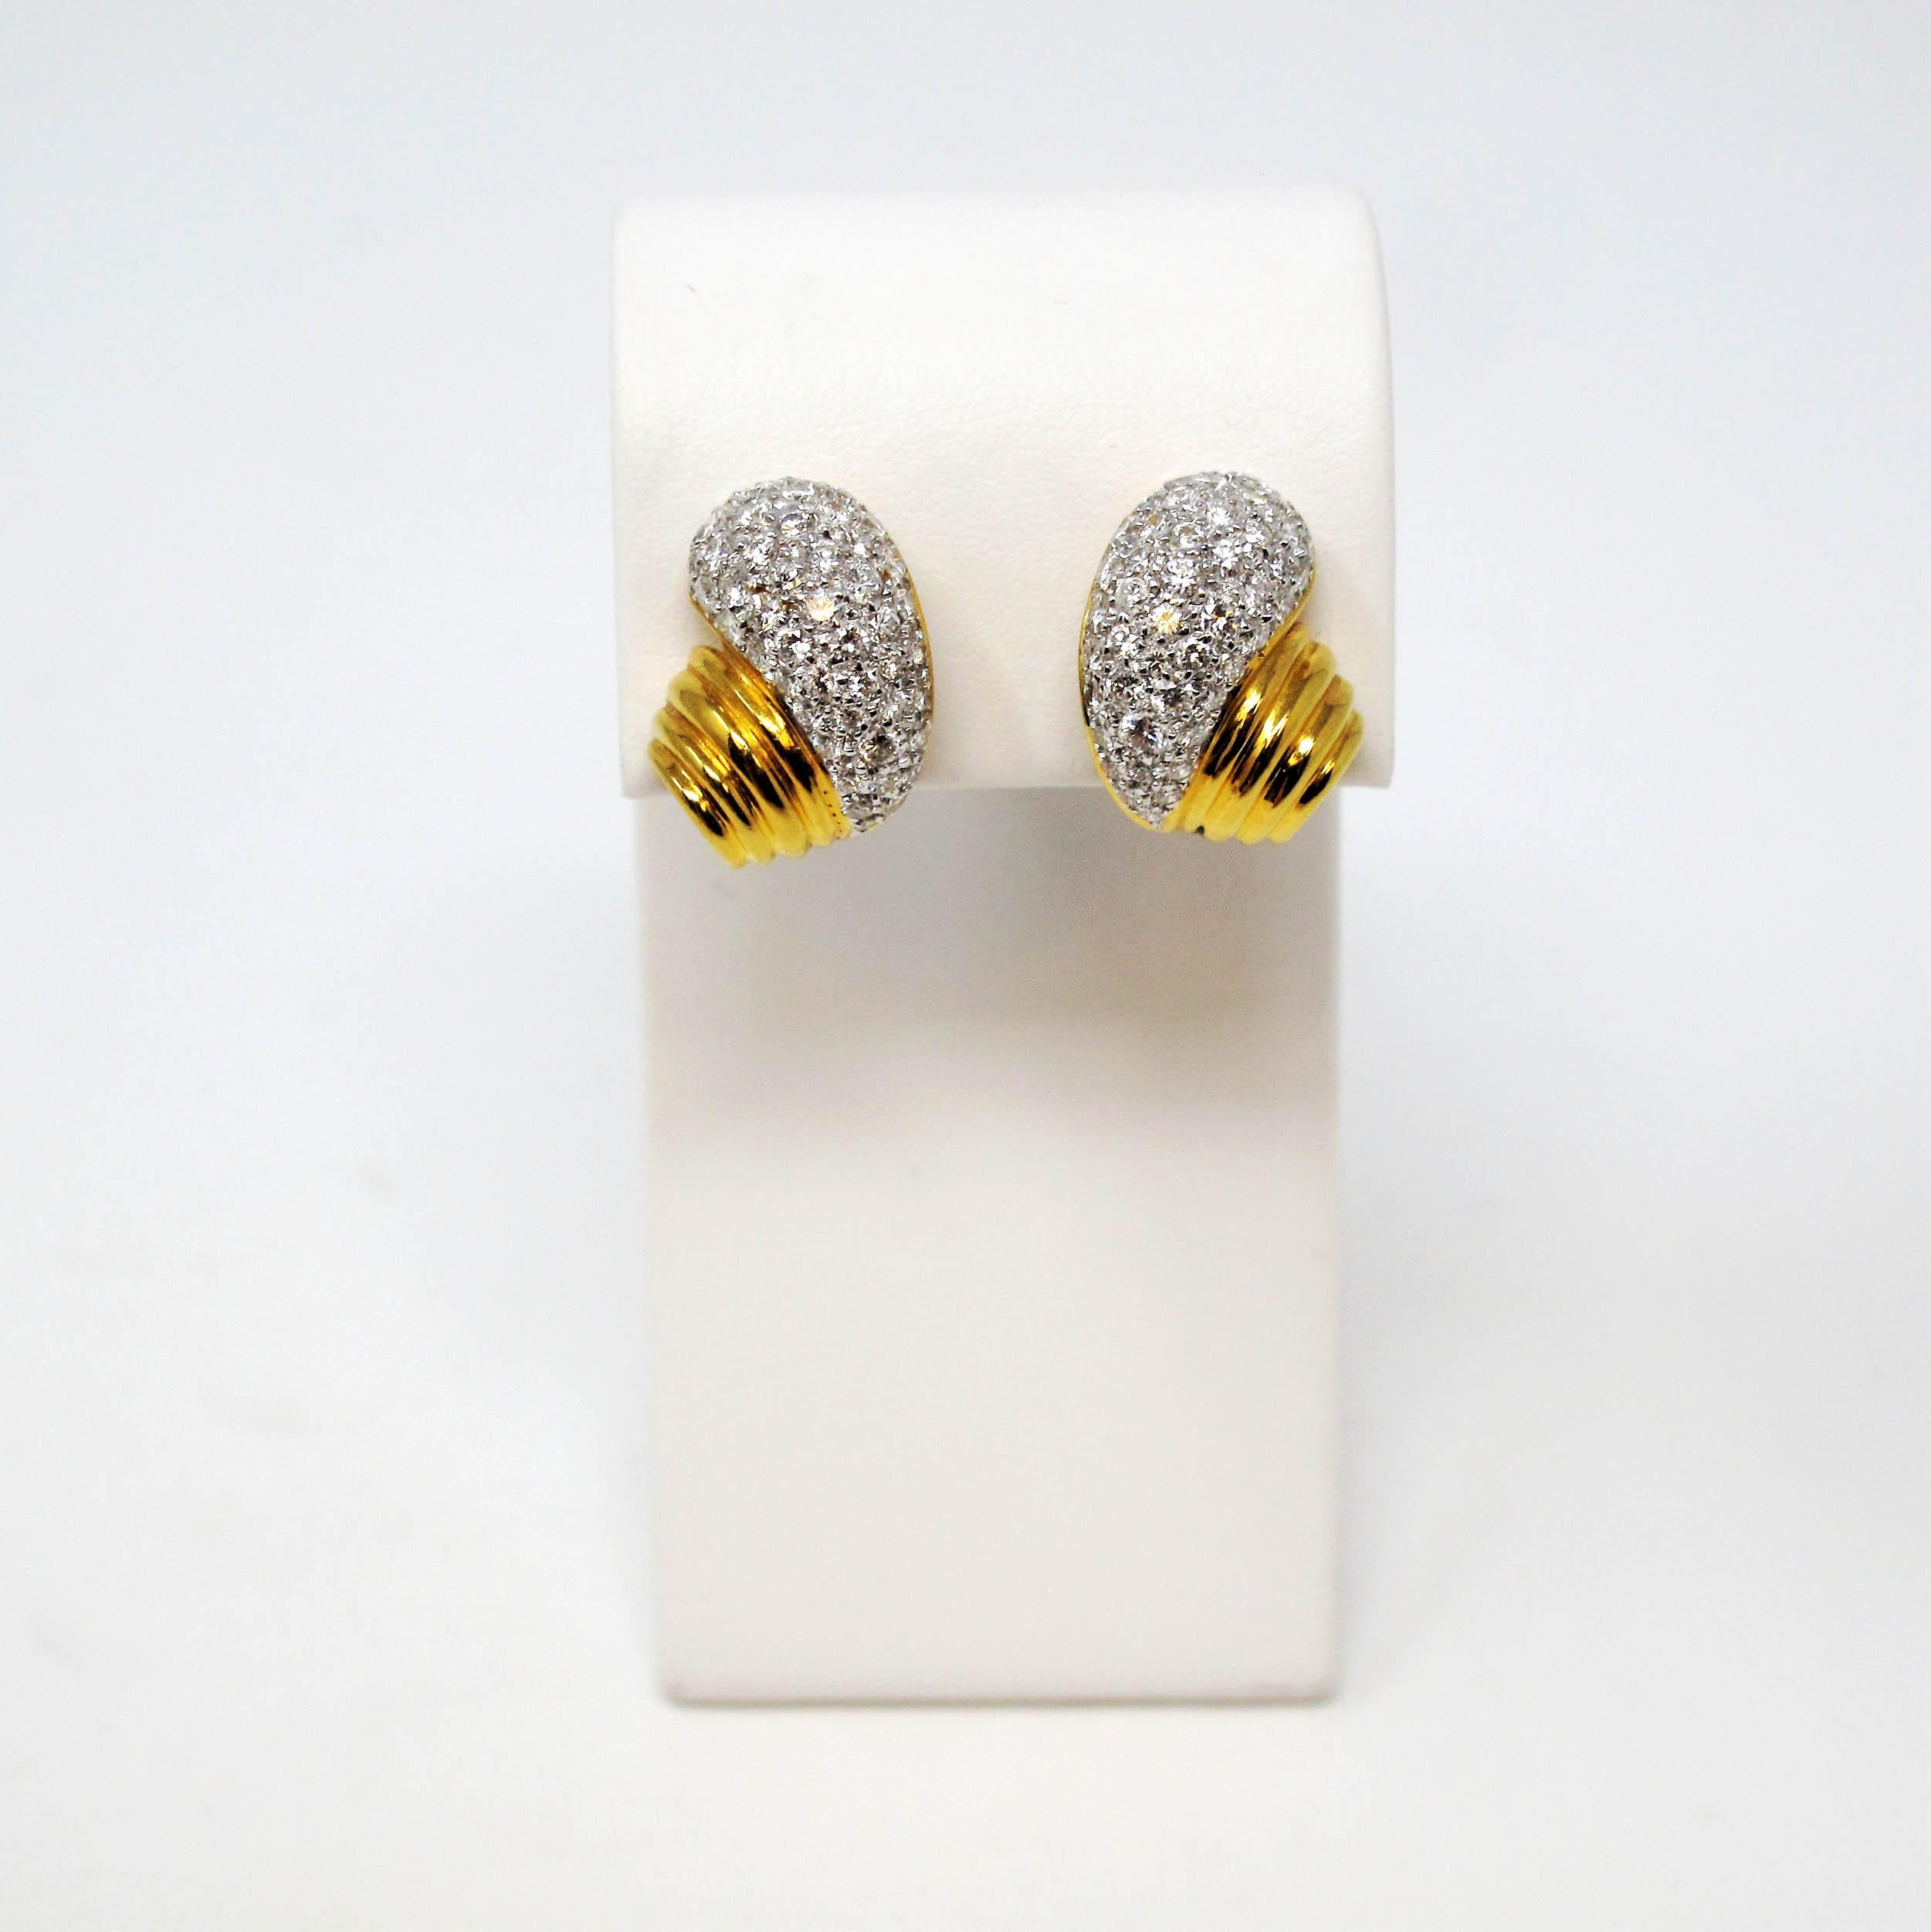 2.95 Carats Total Pave Diamond Door Knocker Non-Pierced Earrings 18K Yellow Gold In Good Condition For Sale In Scottsdale, AZ